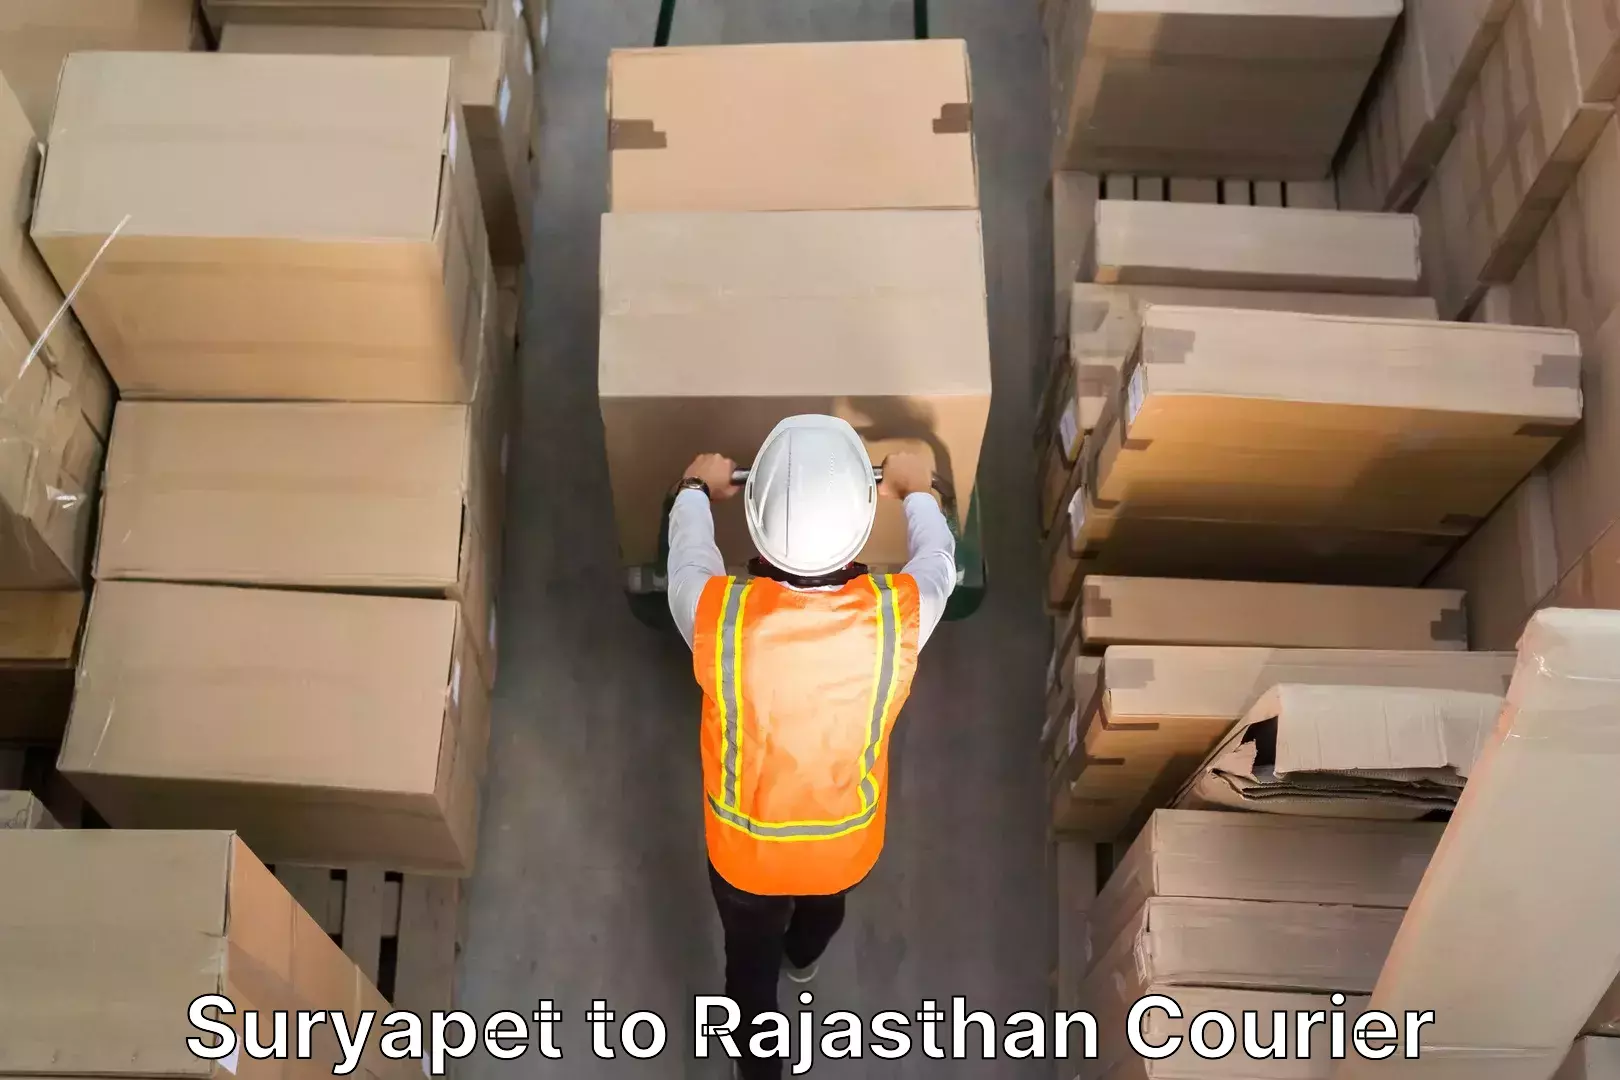 Furniture delivery service Suryapet to Rajasthan